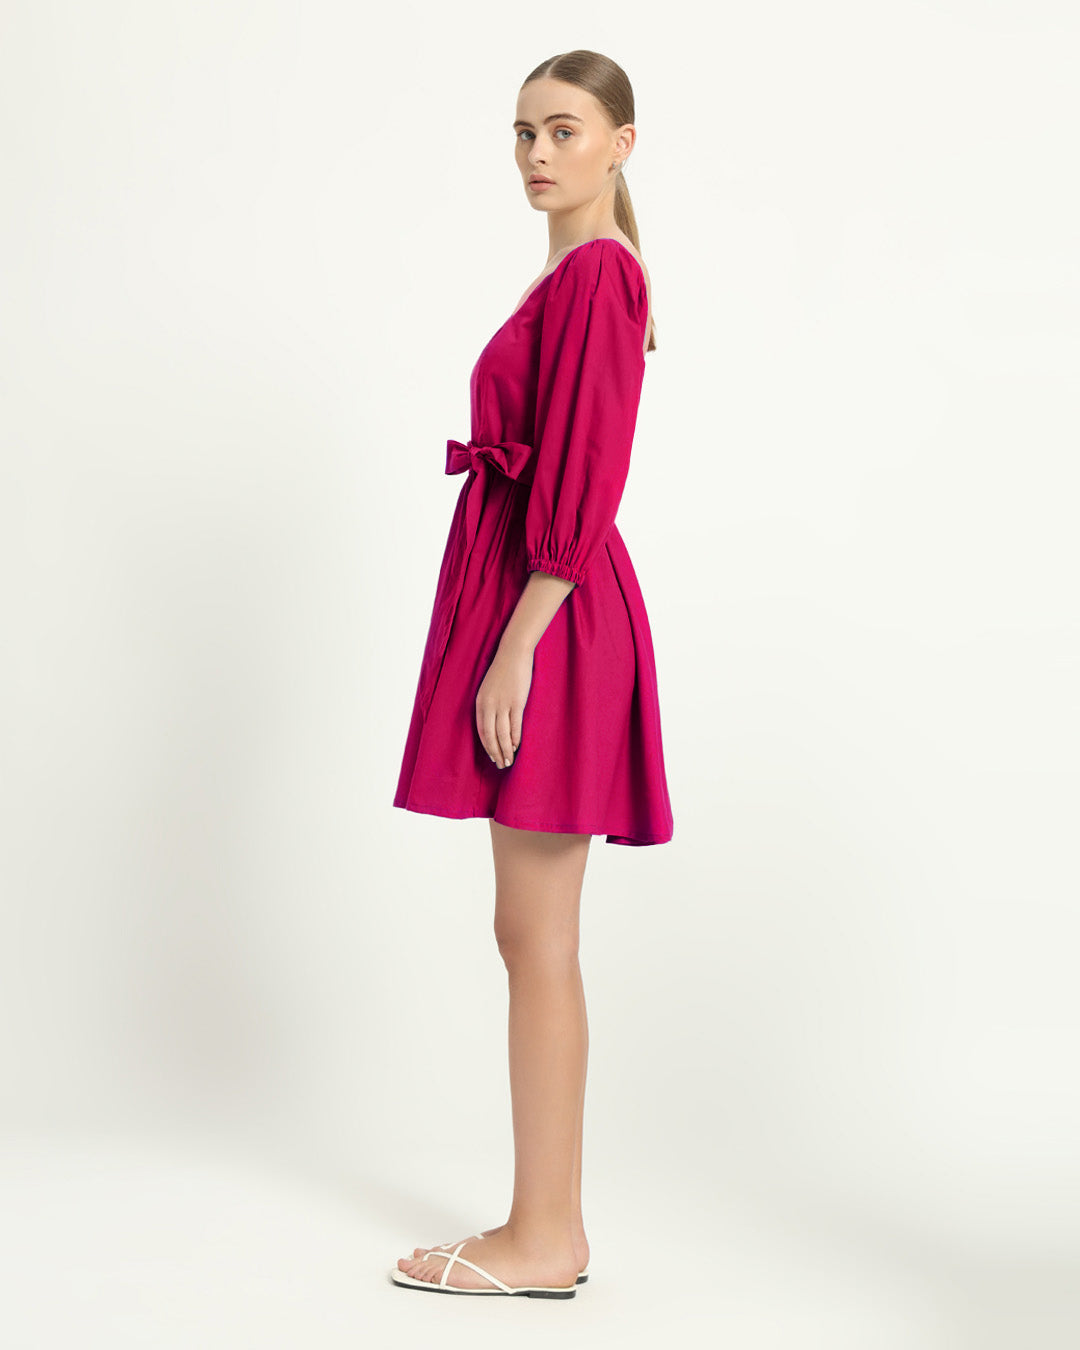 The Winklern Berry Cotton Dress